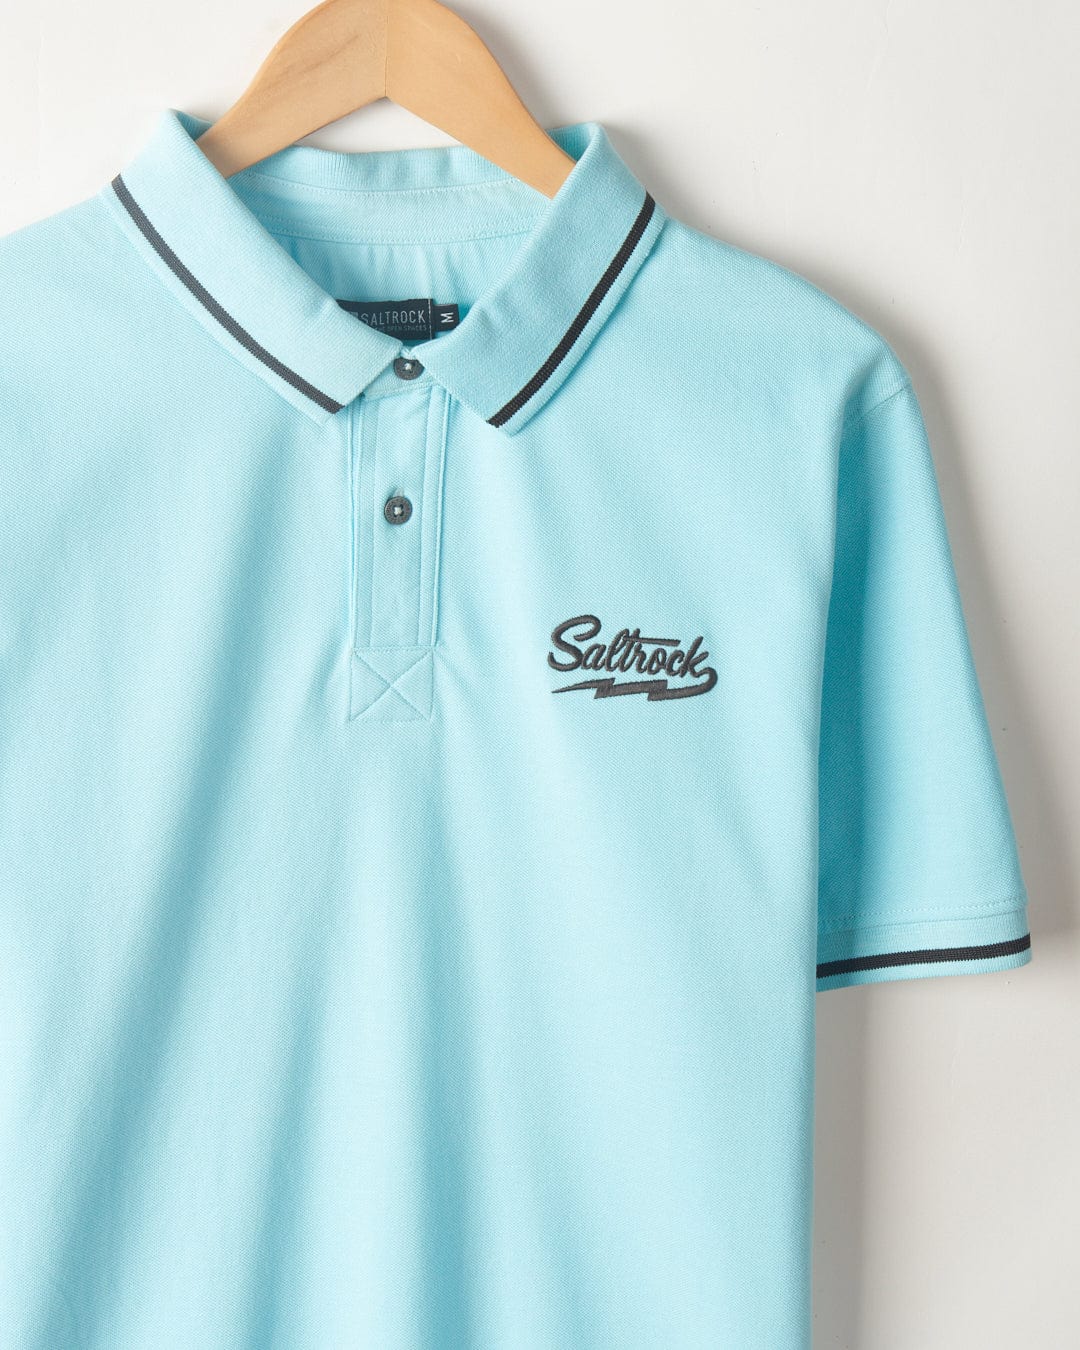 A light blue Saltrock Strike Logo - Mens Short Sleeve Polo Shirt with black stripes on the collar and sleeve edges. It has a "Saltrock" logo embroidered on the left chest. The polo shirt is hung on a wooden hanger against a white wall.